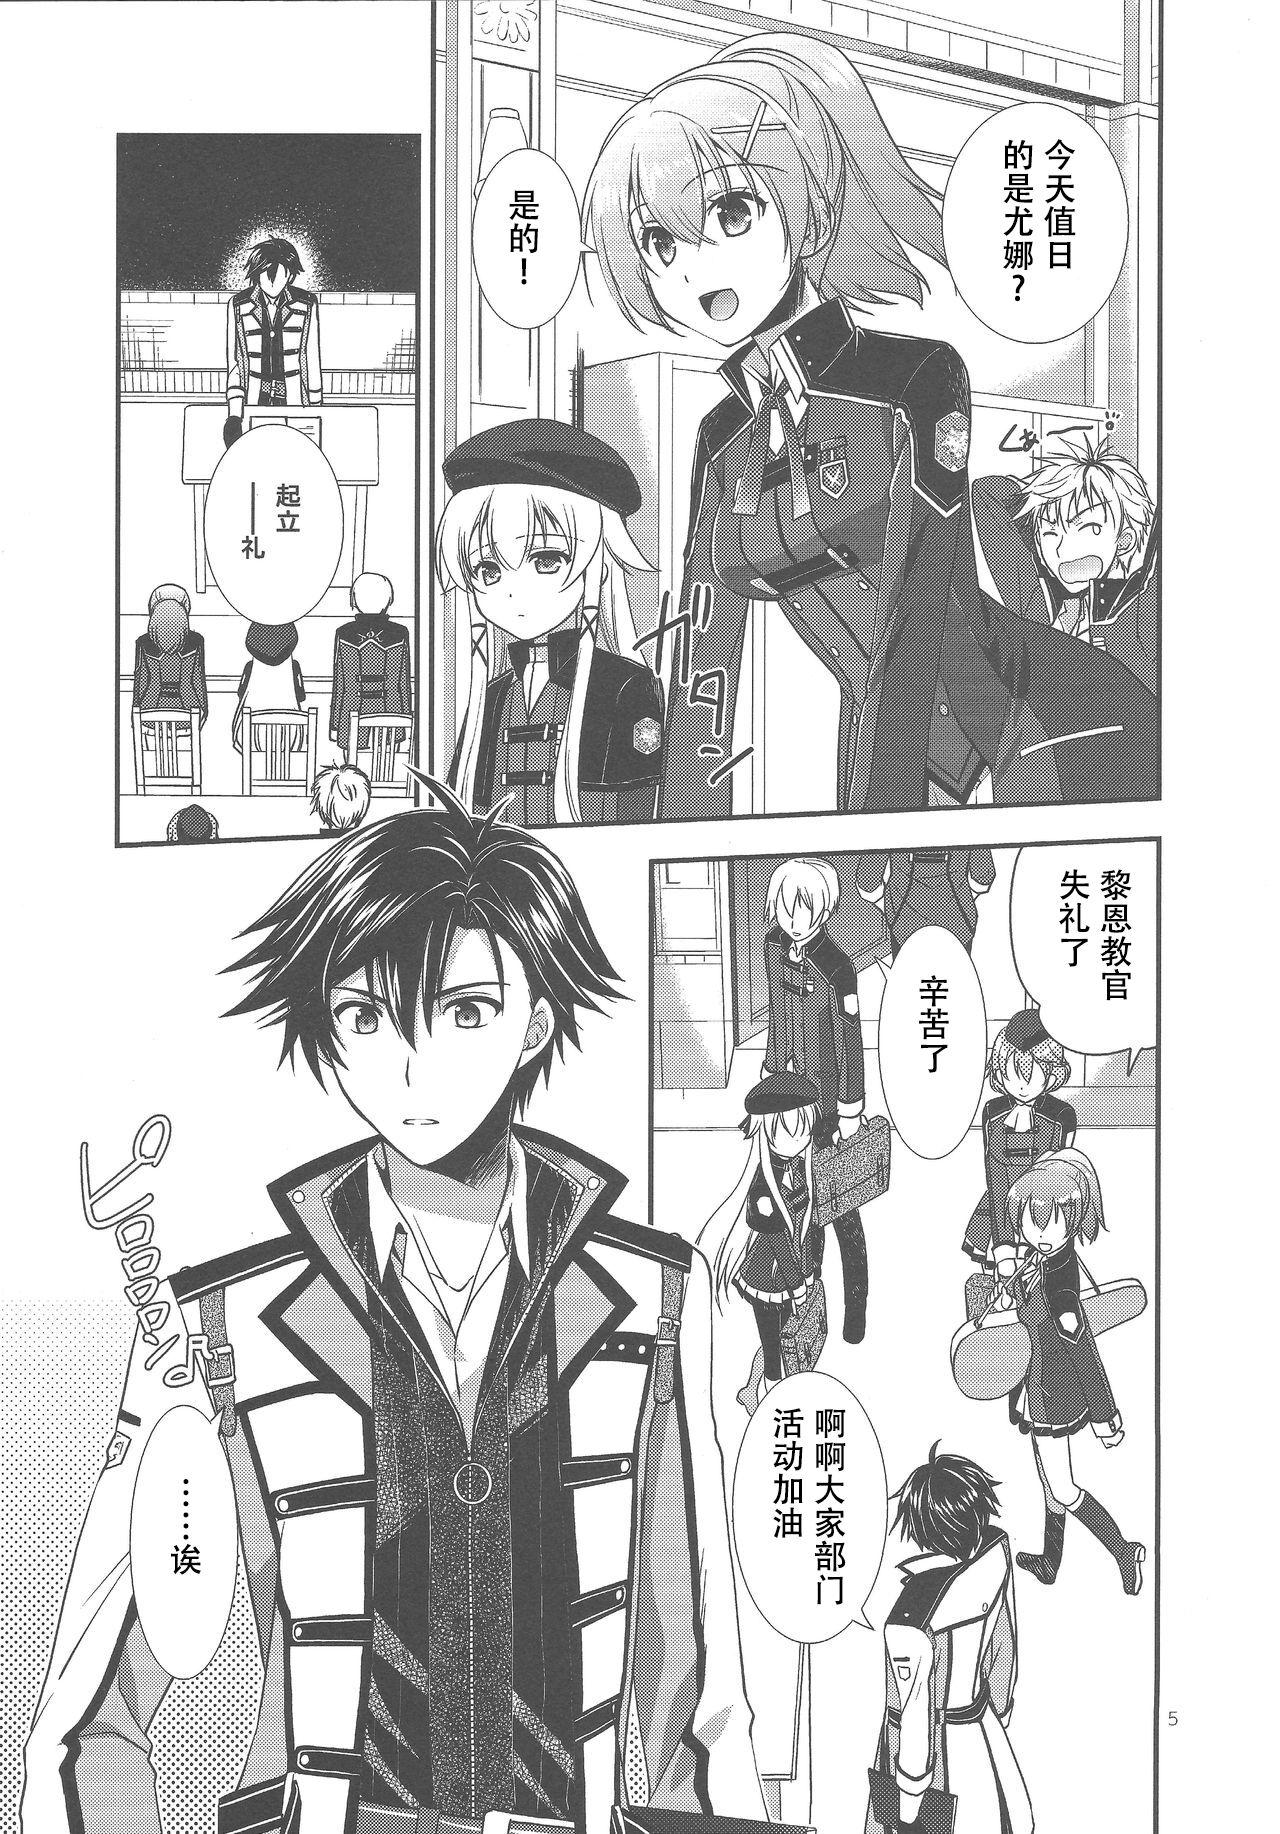 Cheating Wife Houkago Date - The legend of heroes | eiyuu densetsu Blows - Page 3